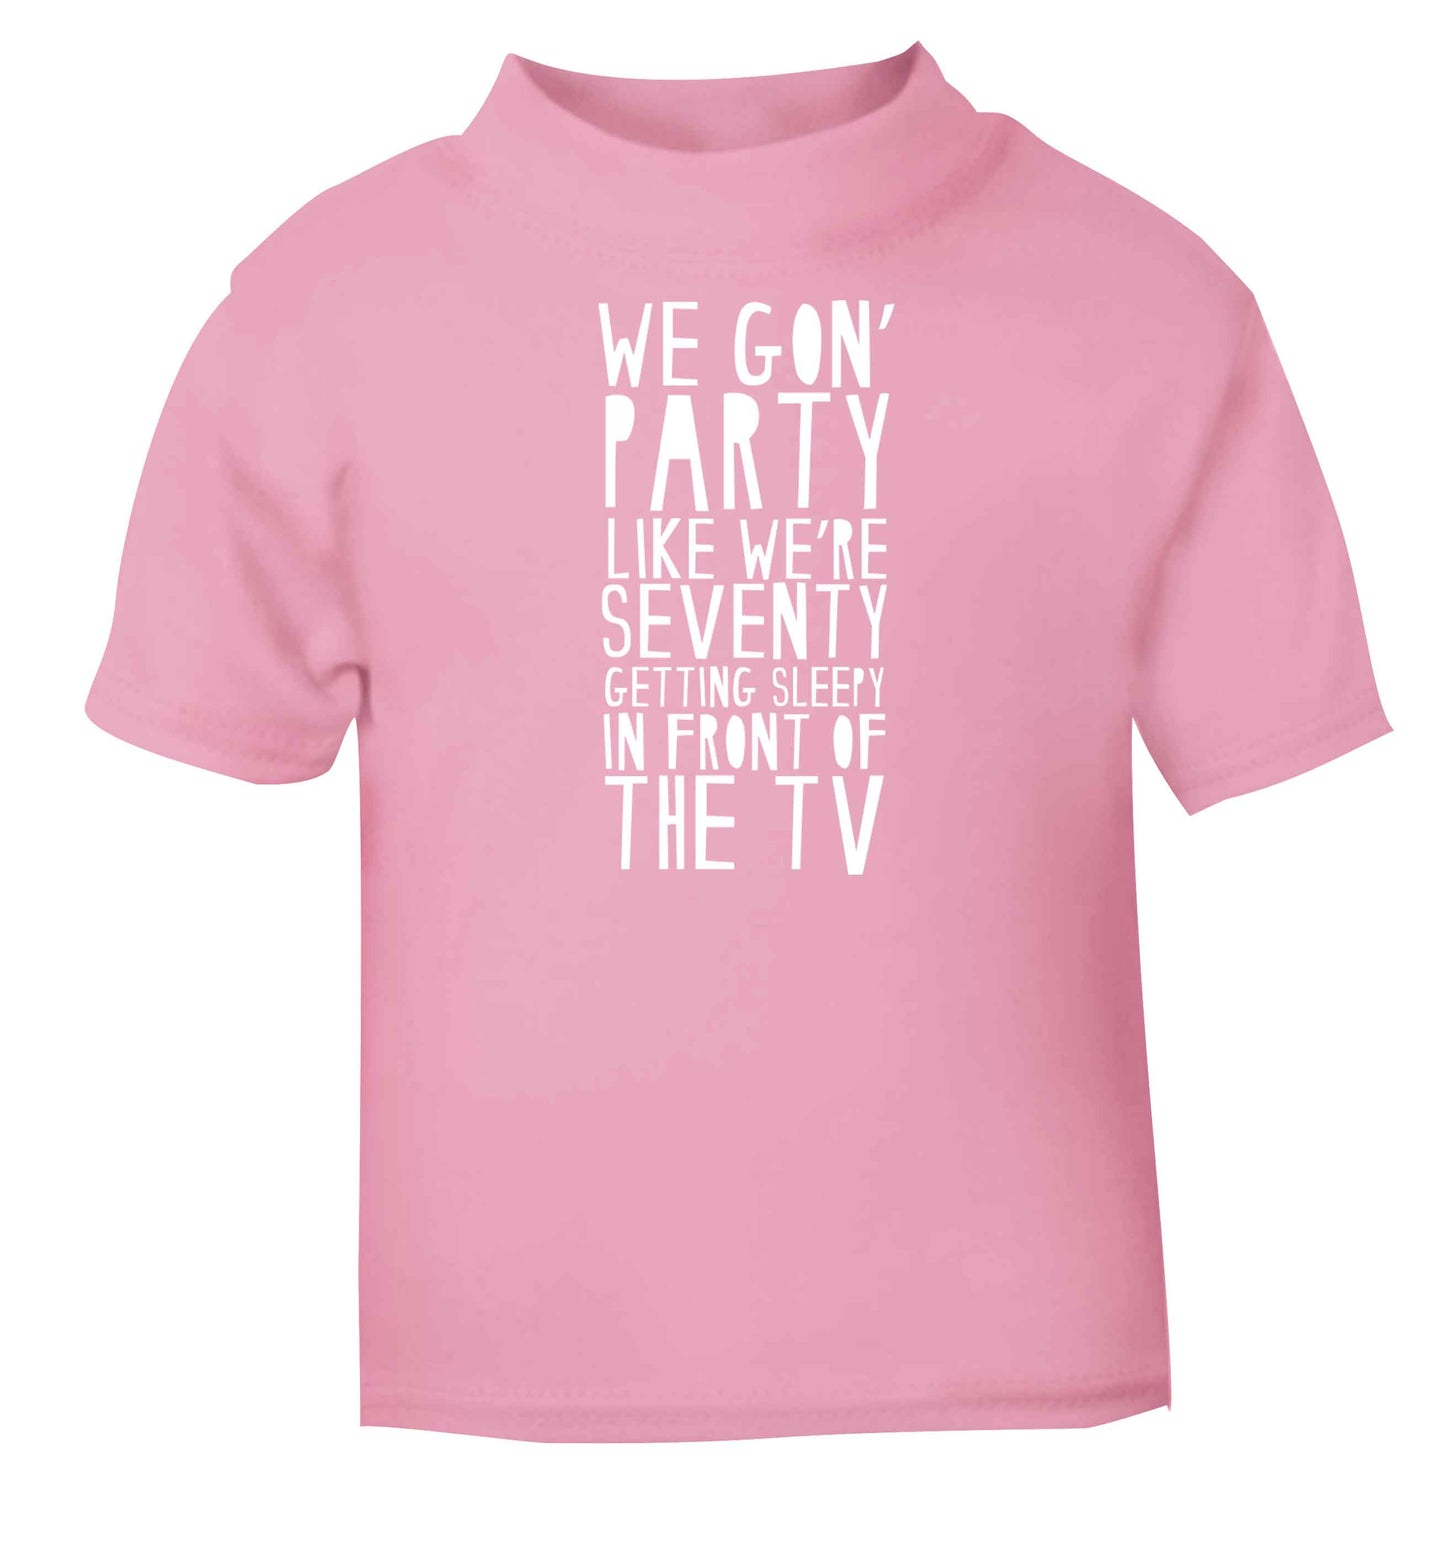 We gon' party like we're seventy getting sleepy in front of the TV light pink baby toddler Tshirt 2 Years